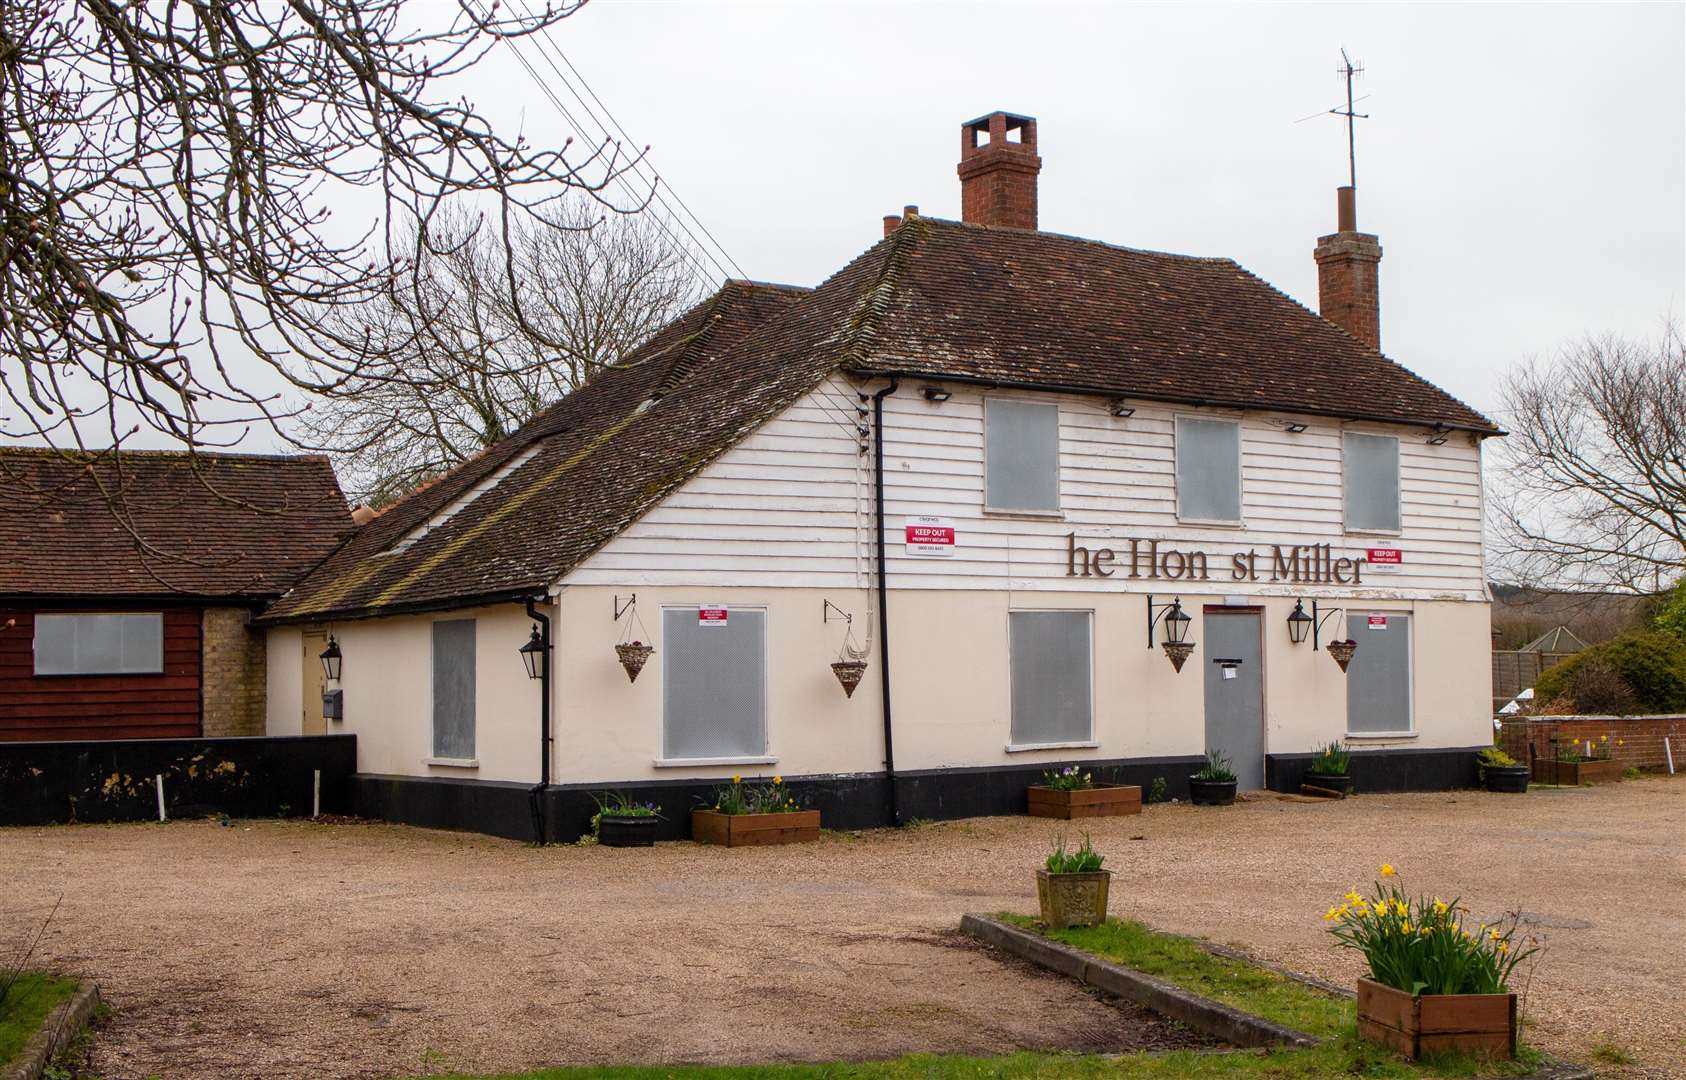 Brook residents have hit out at plans for The Honest Miller